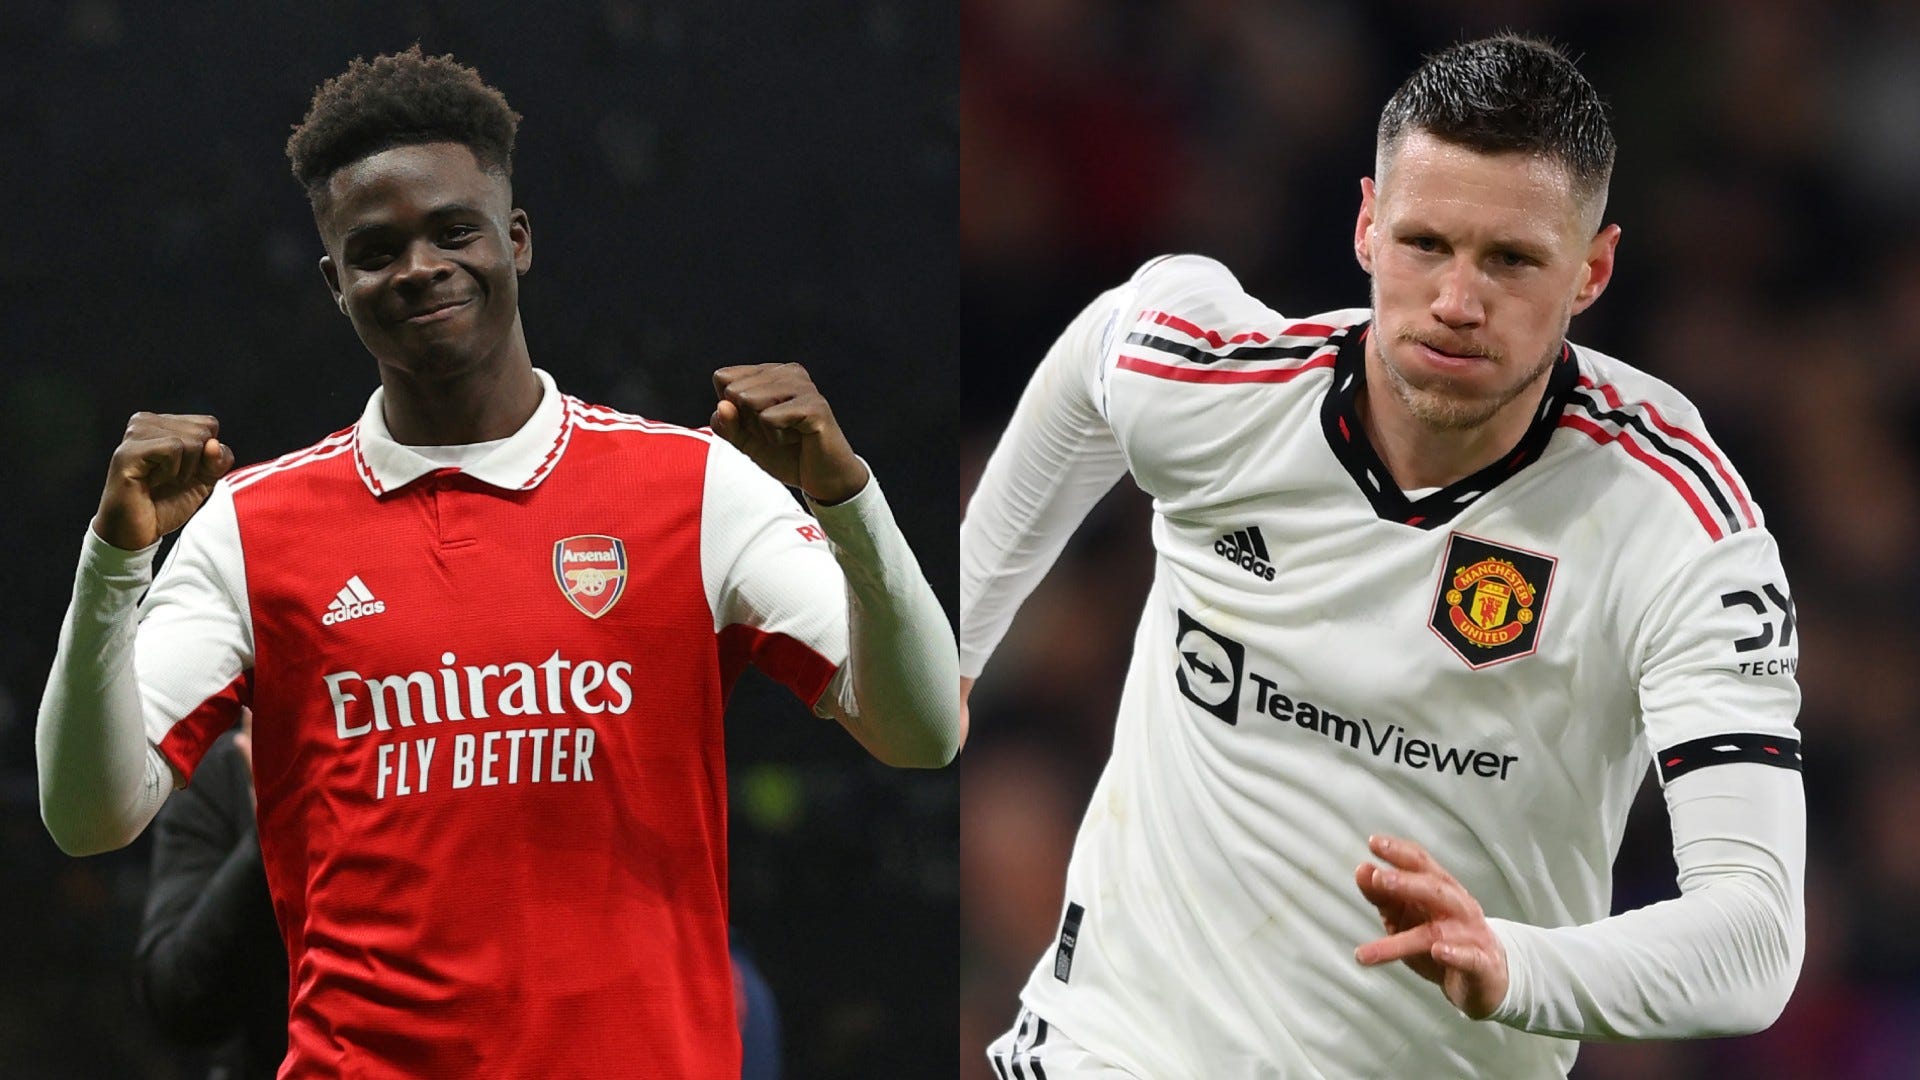 Arsenal vs Manchester United Live stream, TV channel, kick-off time and where to watch Goal India